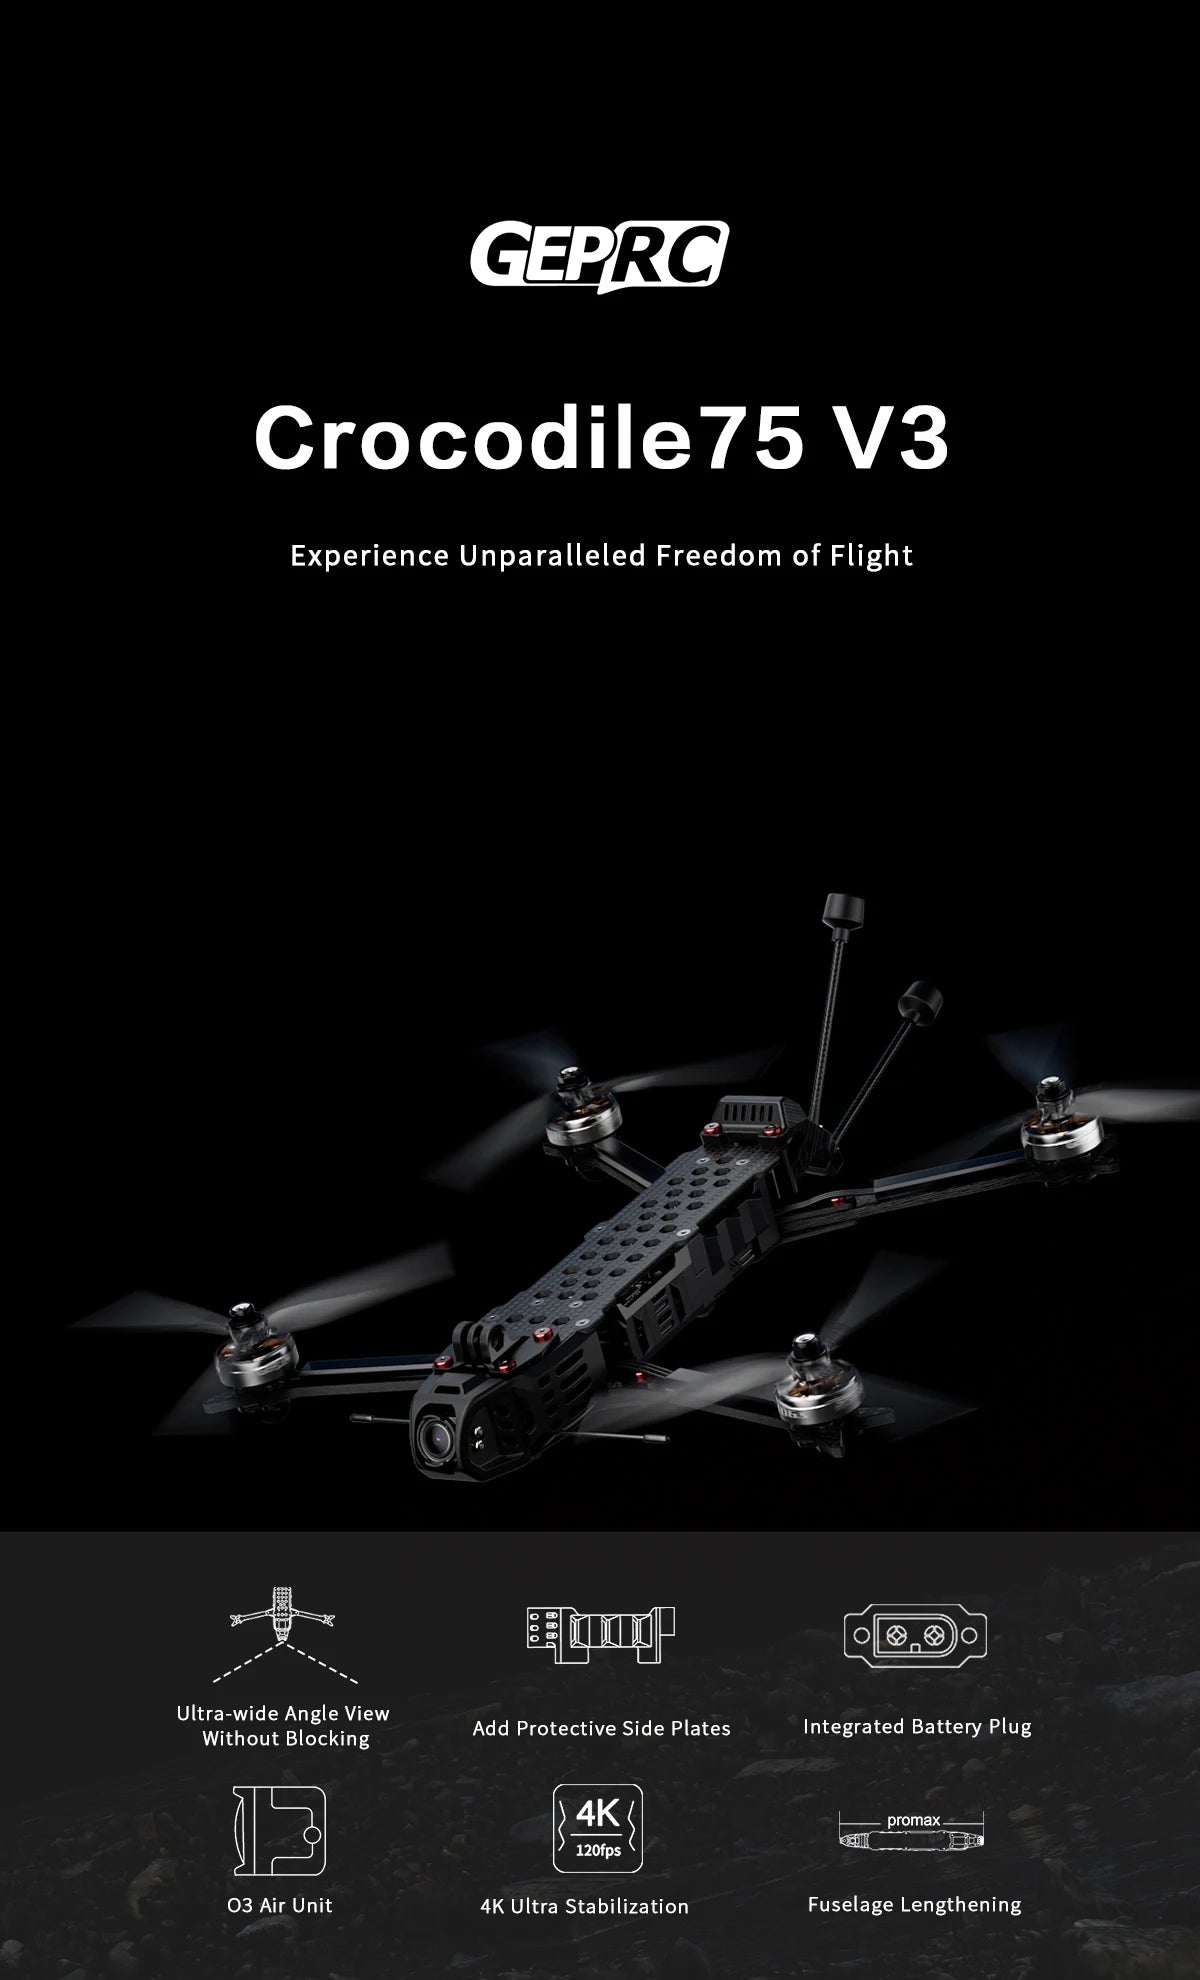 GEPRC Crocodile75 V3 HD, GEPRG Crocodile75 V3 Experience Unparalleled Freedom of Flight Ultra